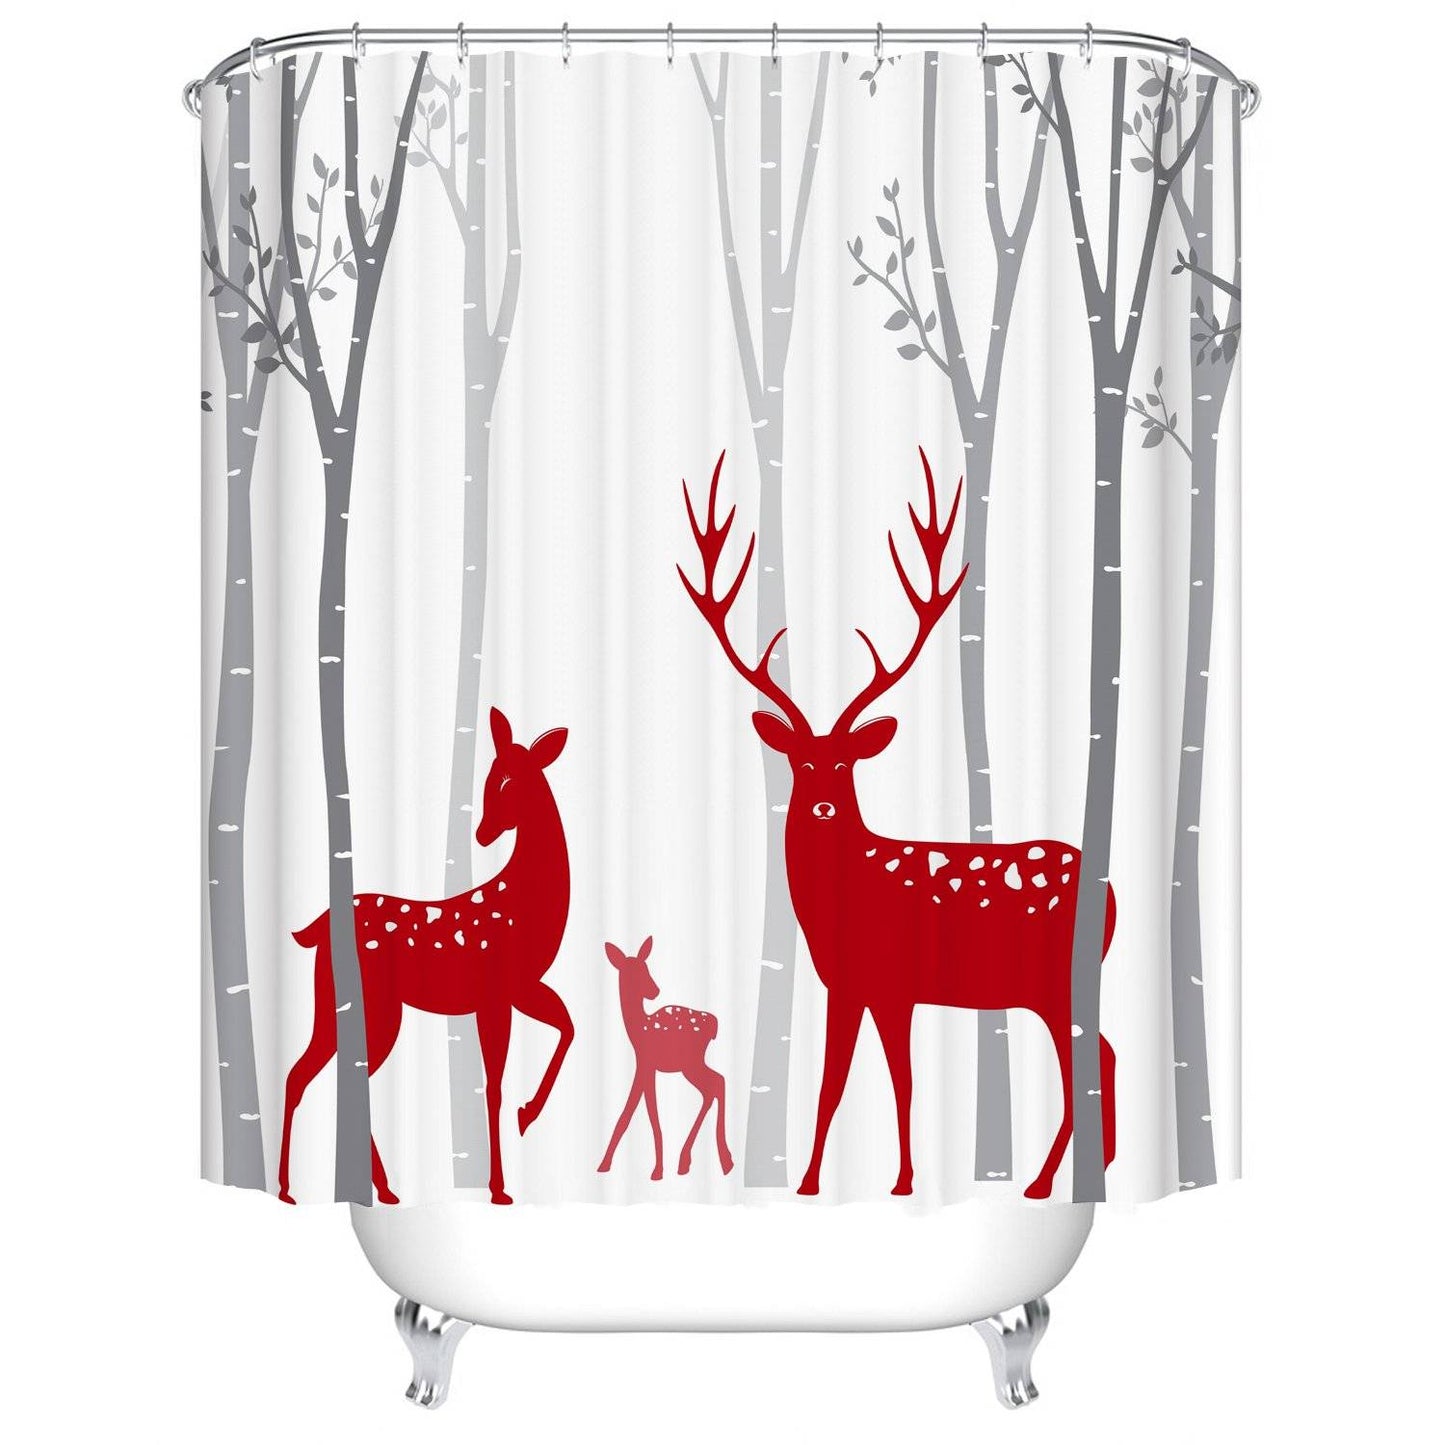 Red Forest Animal Black Trees Winter Deer Family Shower Curtain